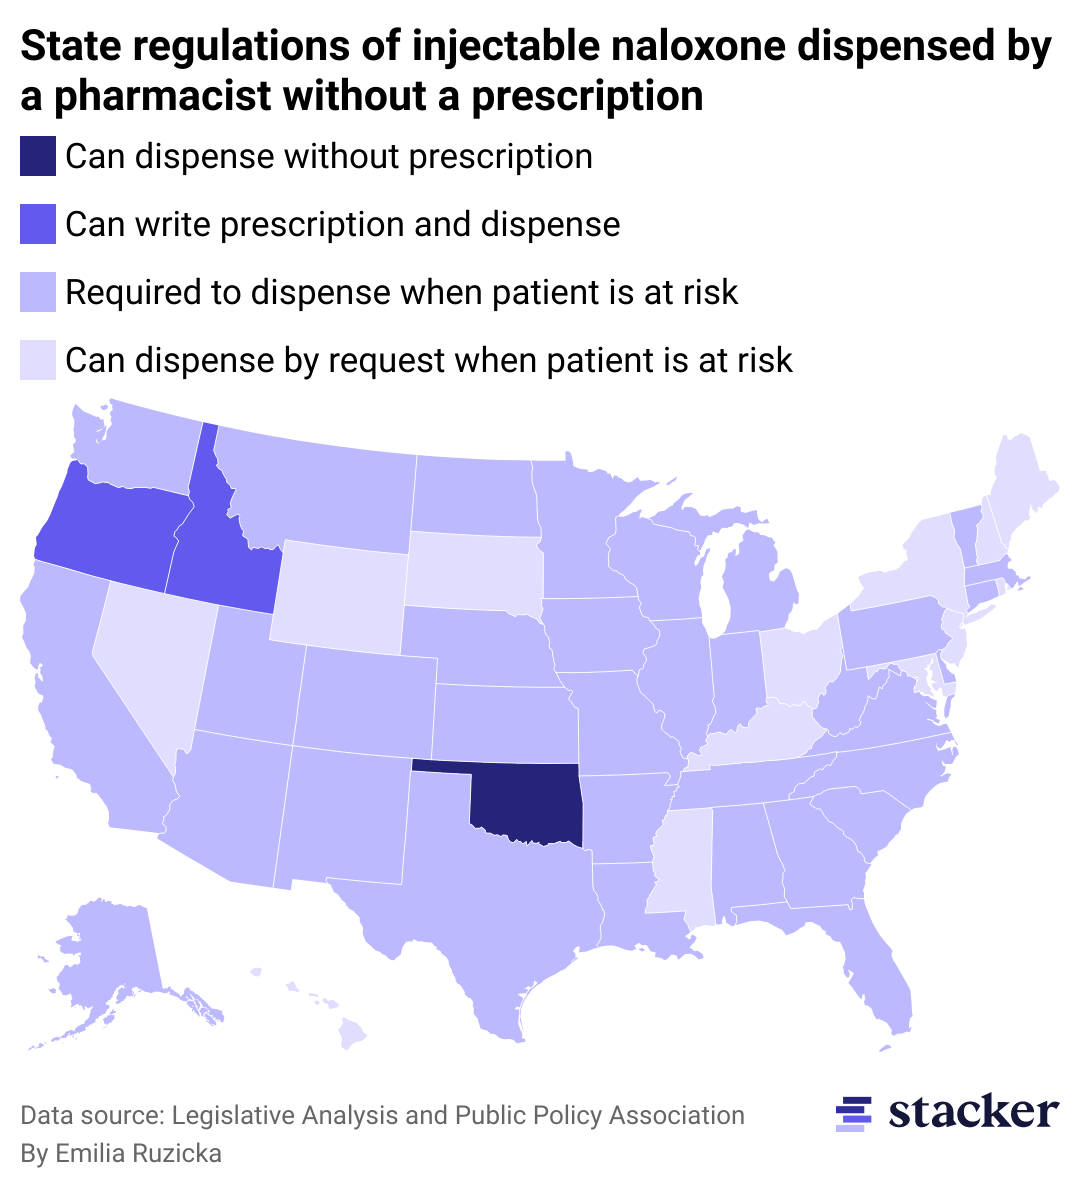 Light colored map with shades of purple delineating various types of regulations on naloxone